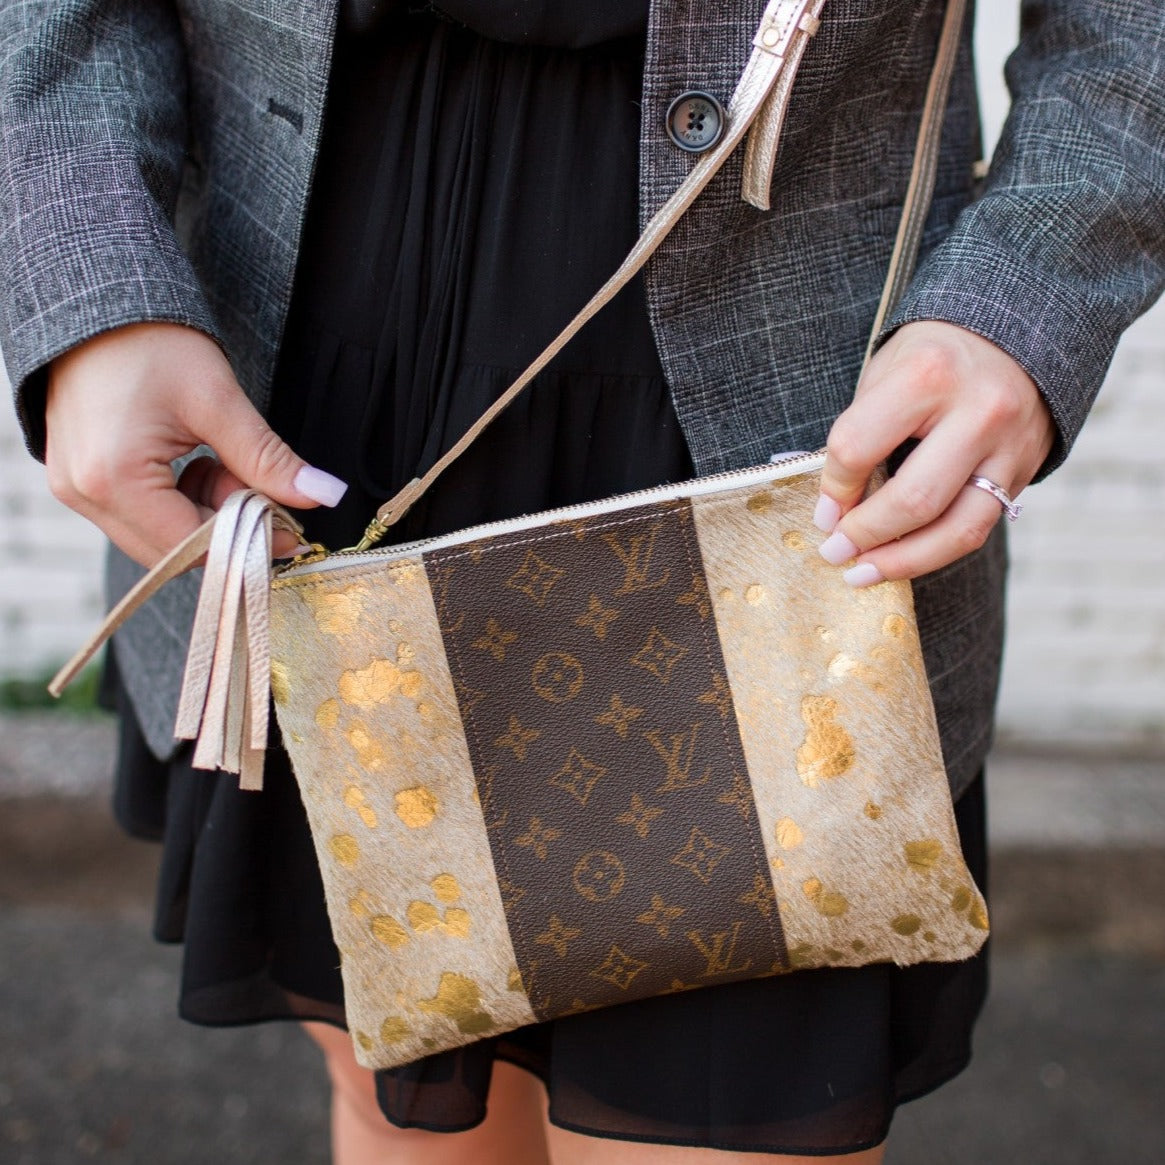 How To Convert My Louis Vuitton Toiletry Pouch 19 To a Crossbody